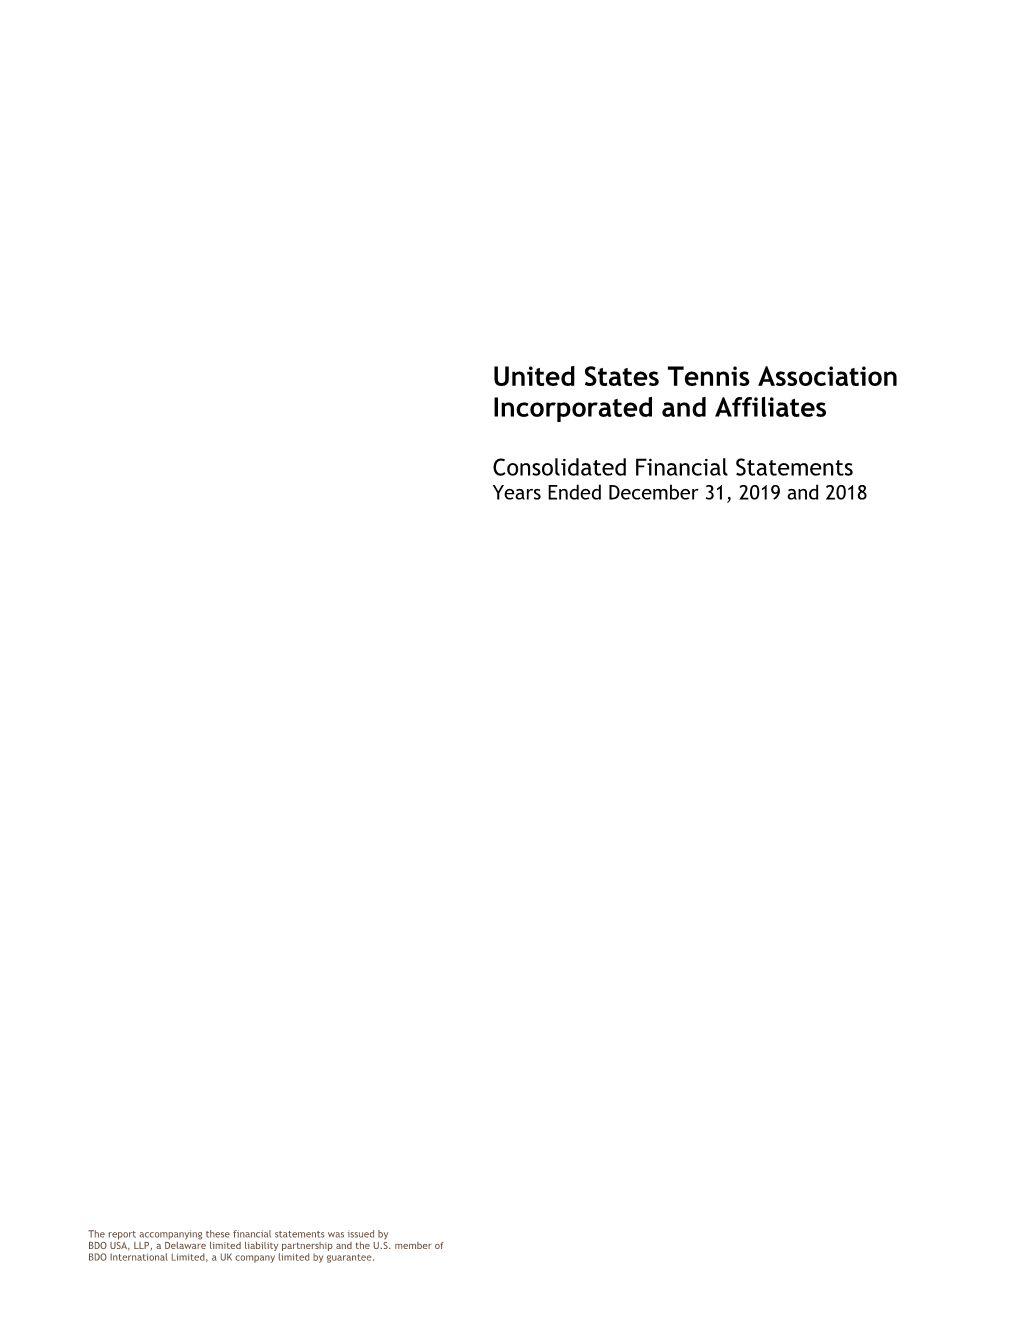 United States Tennis Association Incorporated and Affiliates